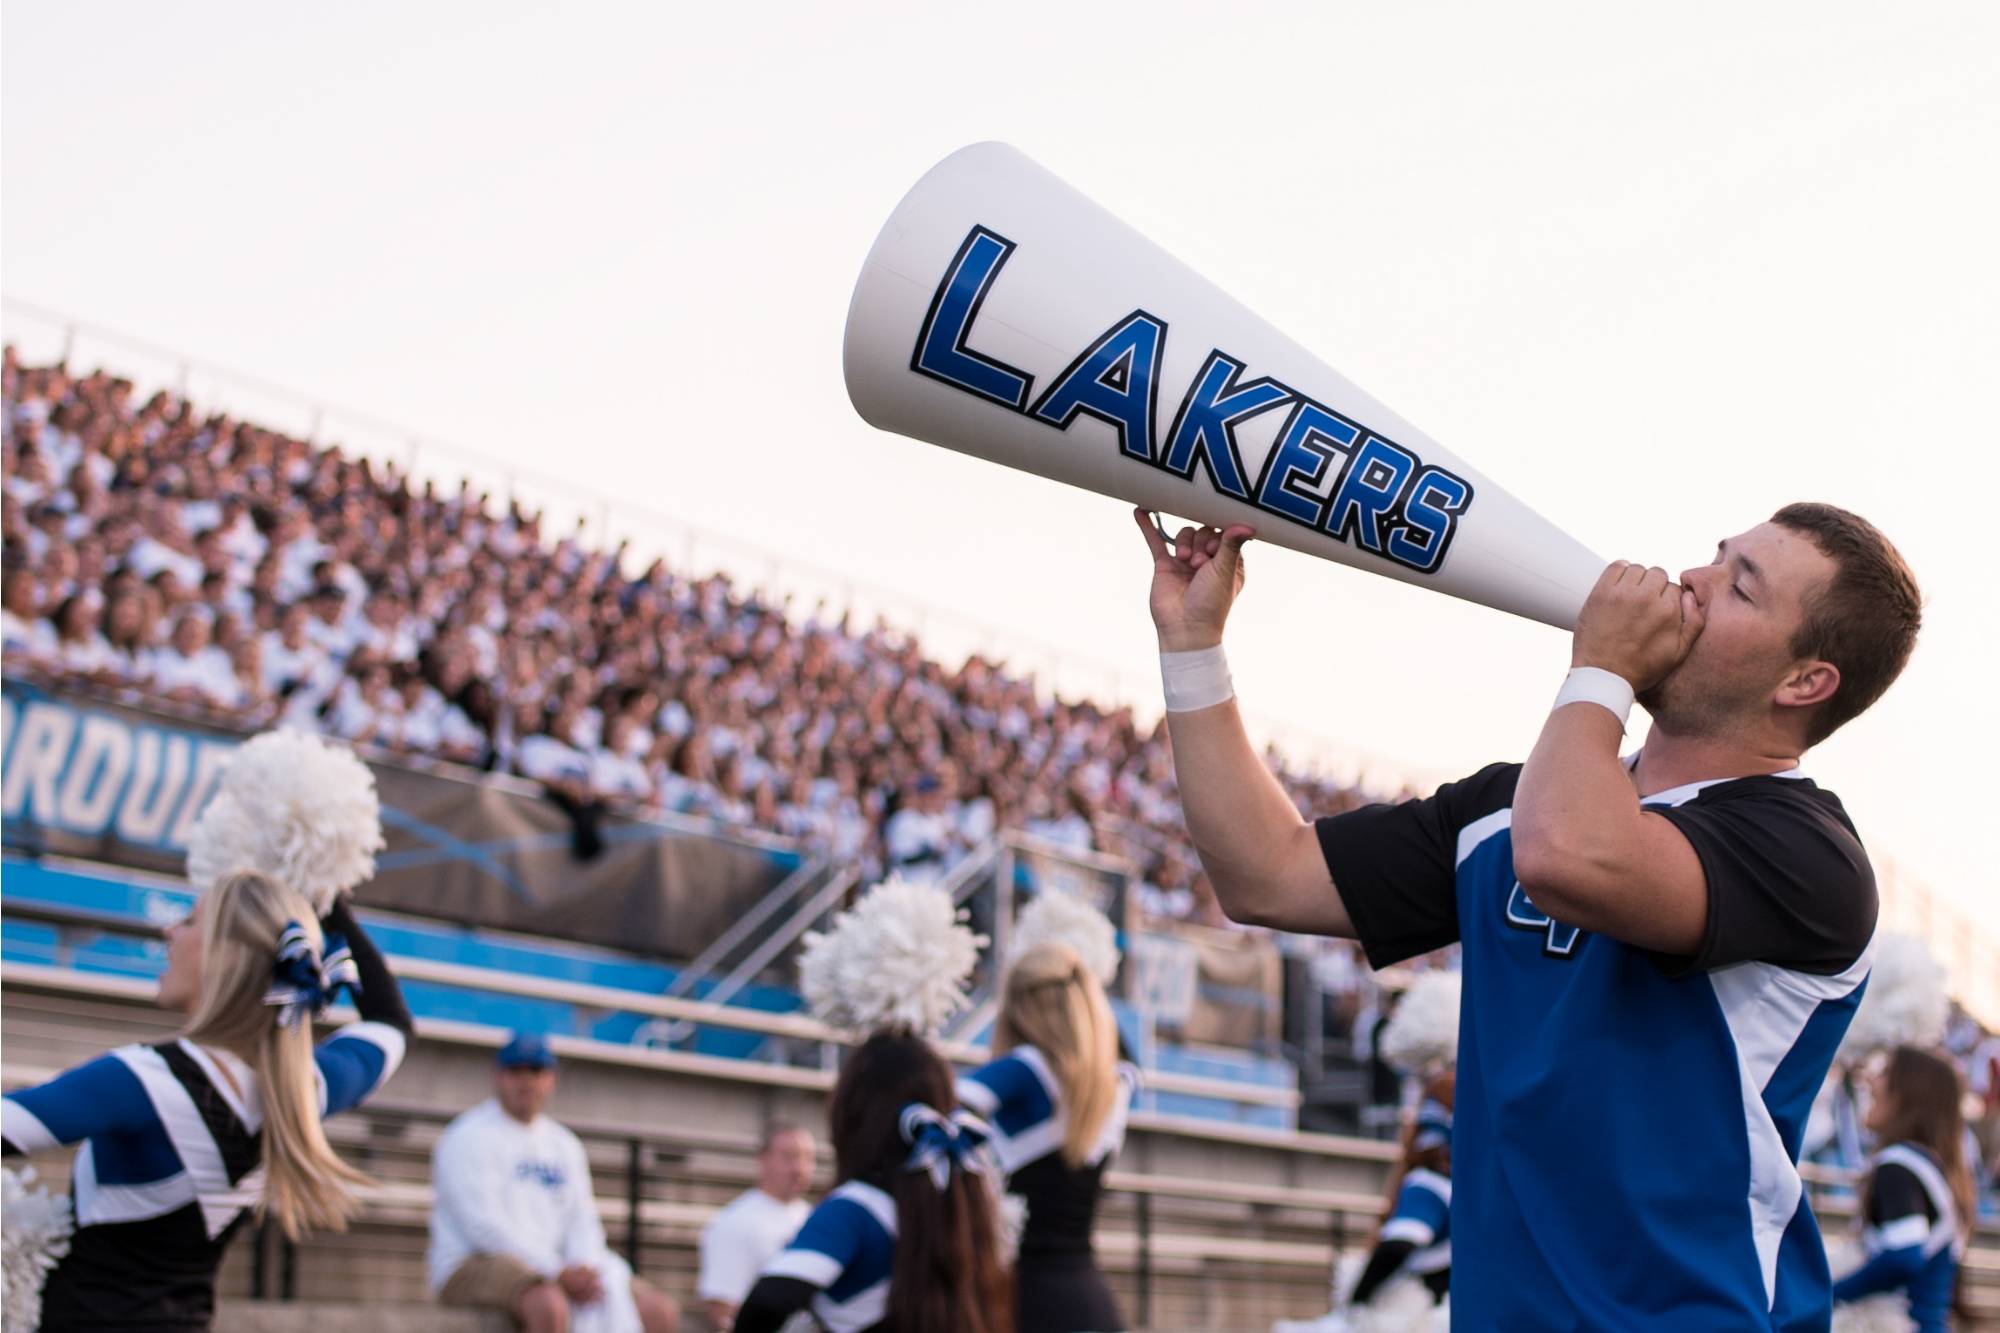 Male cheerleader with megaphone labeled "Lakers"